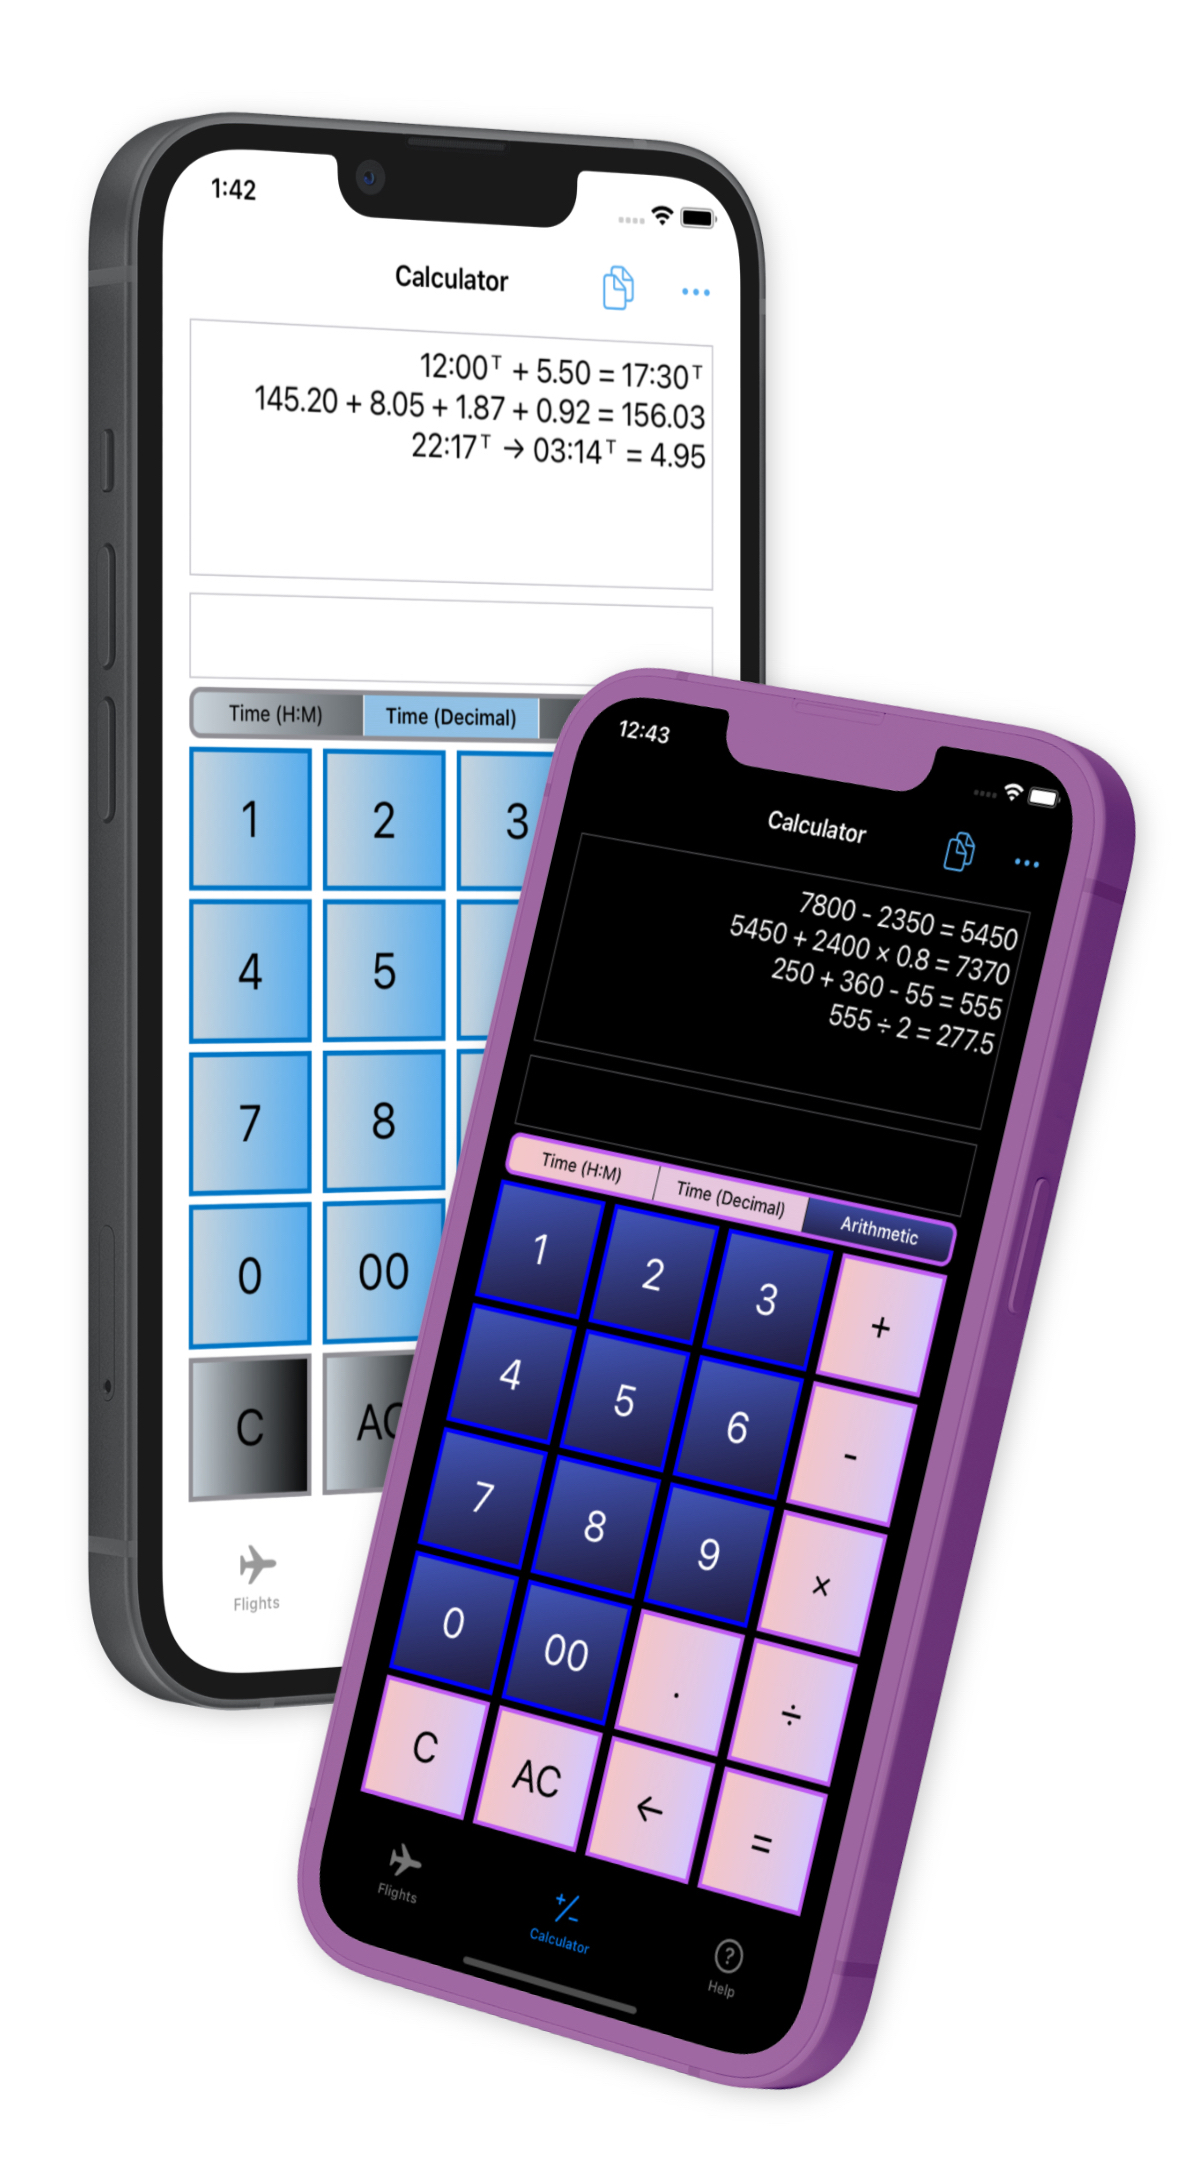 Image of two calculators, one showing the decimal time function and the other the arithmetic function. The first calculator uses the default light blue and silver keyboard and is shown in light mode, the latter demonstrates the dark blue and pink keyboard in dark mode.